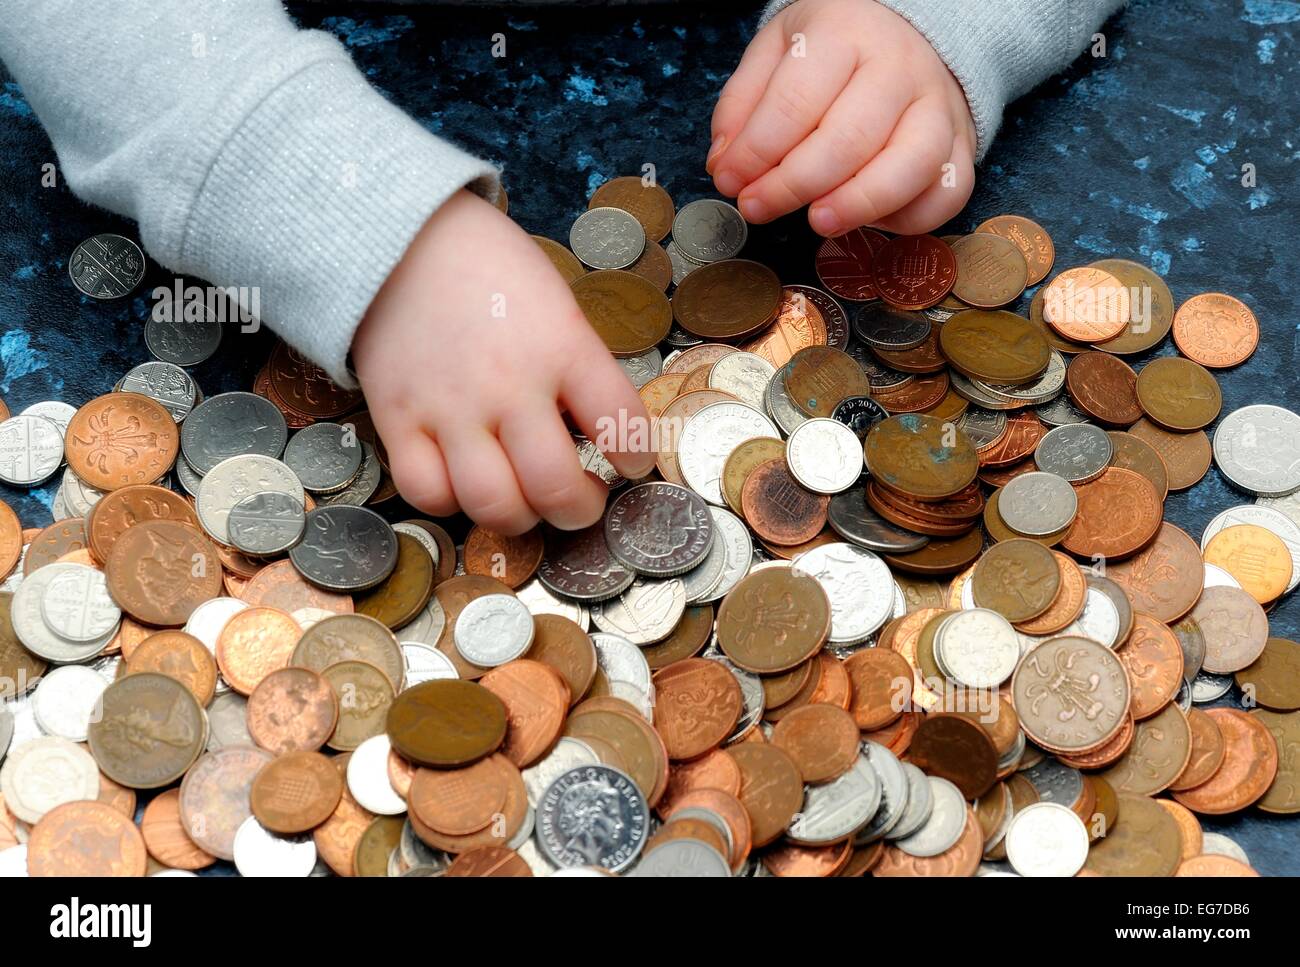 The hand of a 2 year old girl counting piggy bank money Stock Photo